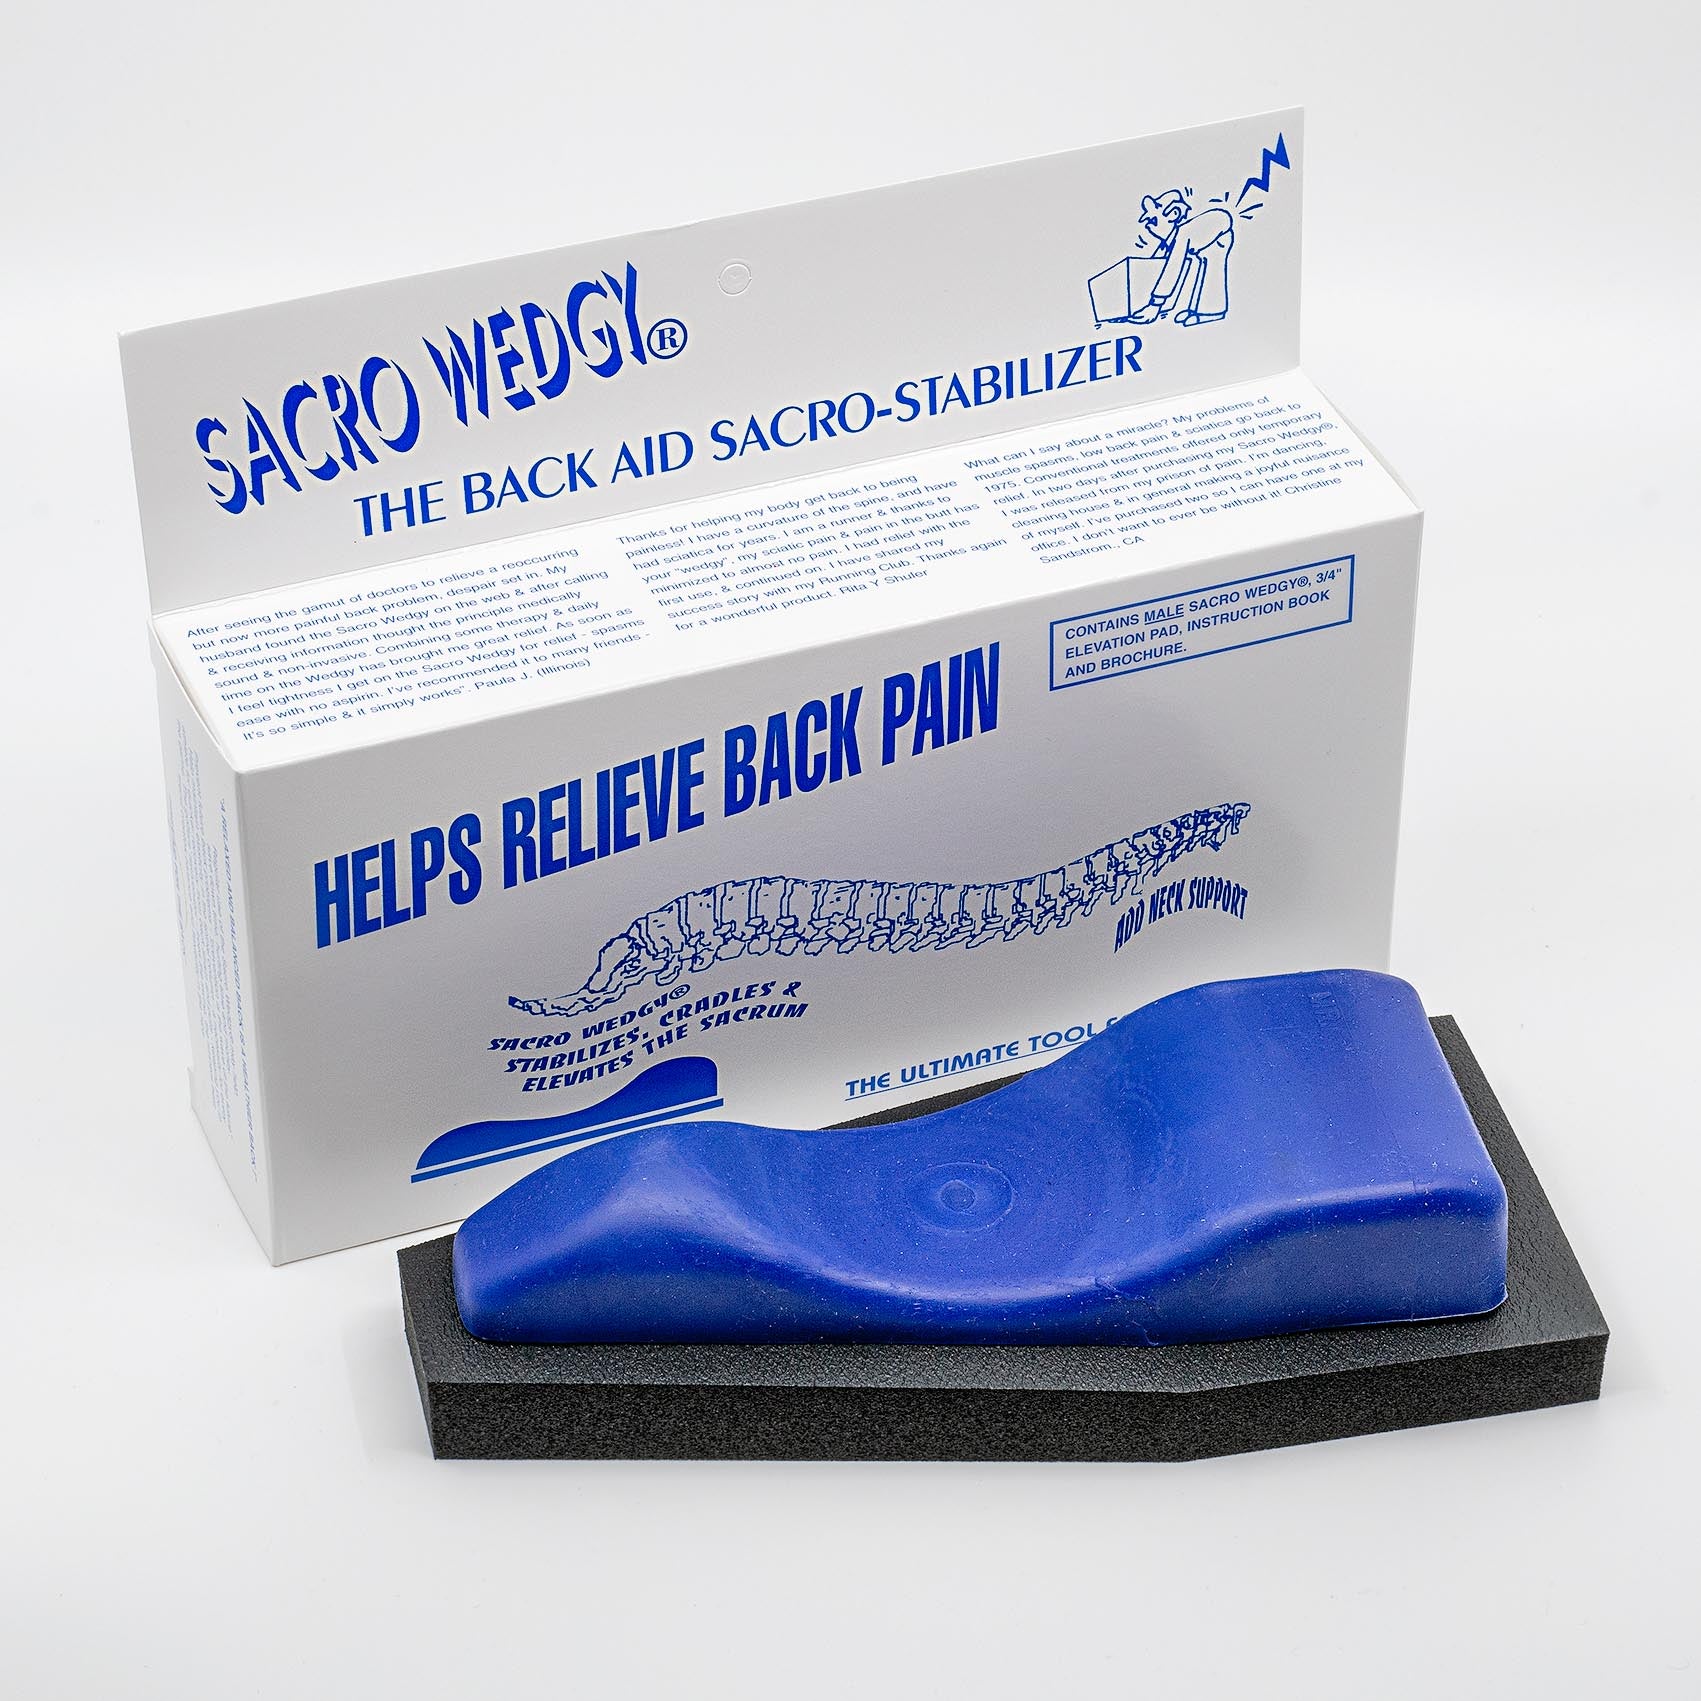 SACRO WEDGY - The Back Aid Sacro Stabilizer - FEMALE VERSION - Helps  Releive Back Pain